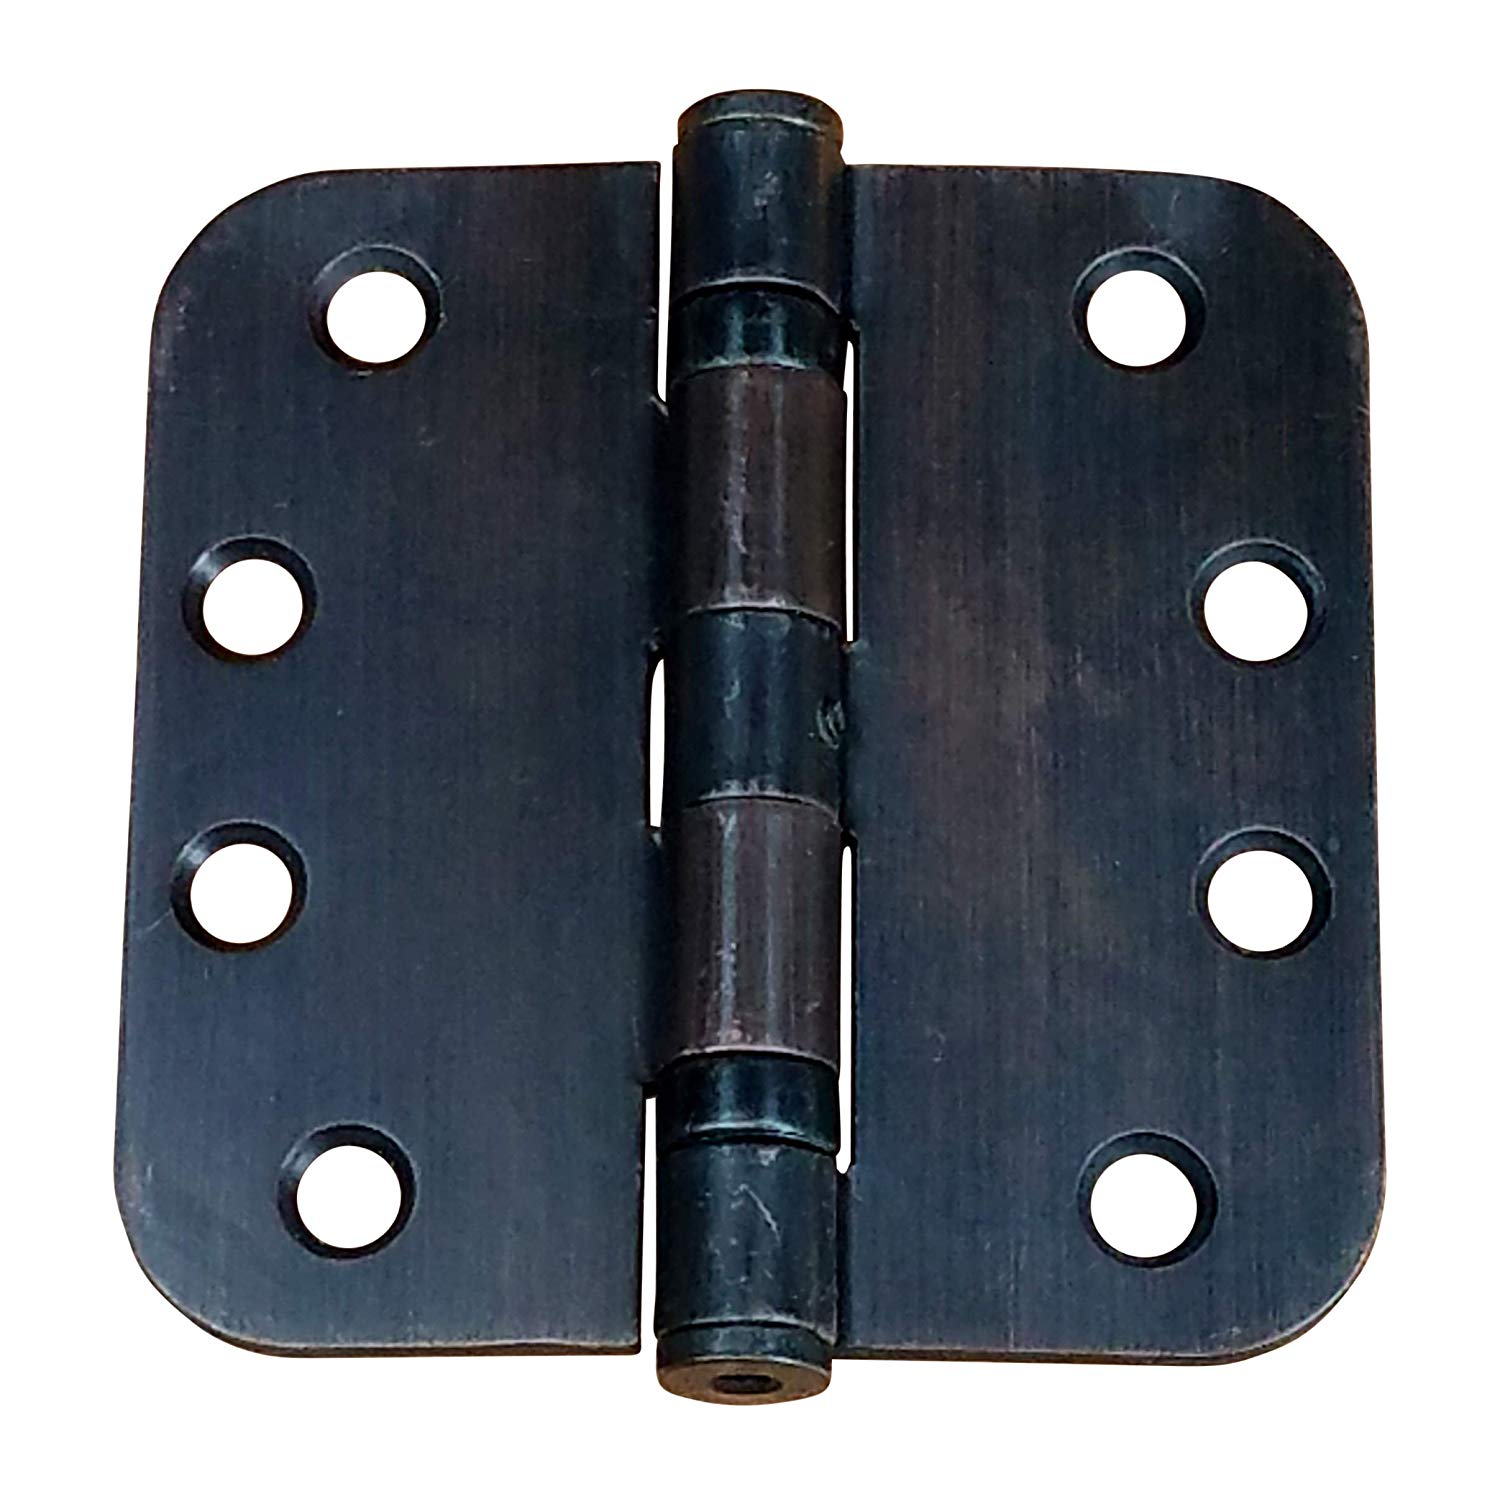 Commercial Door Hinges - 4 Inch with 5/8 Radius - Ball Bearing - Oil Rubbed Bronze - Non Removable Pin - 2 Pack - image 1 of 2